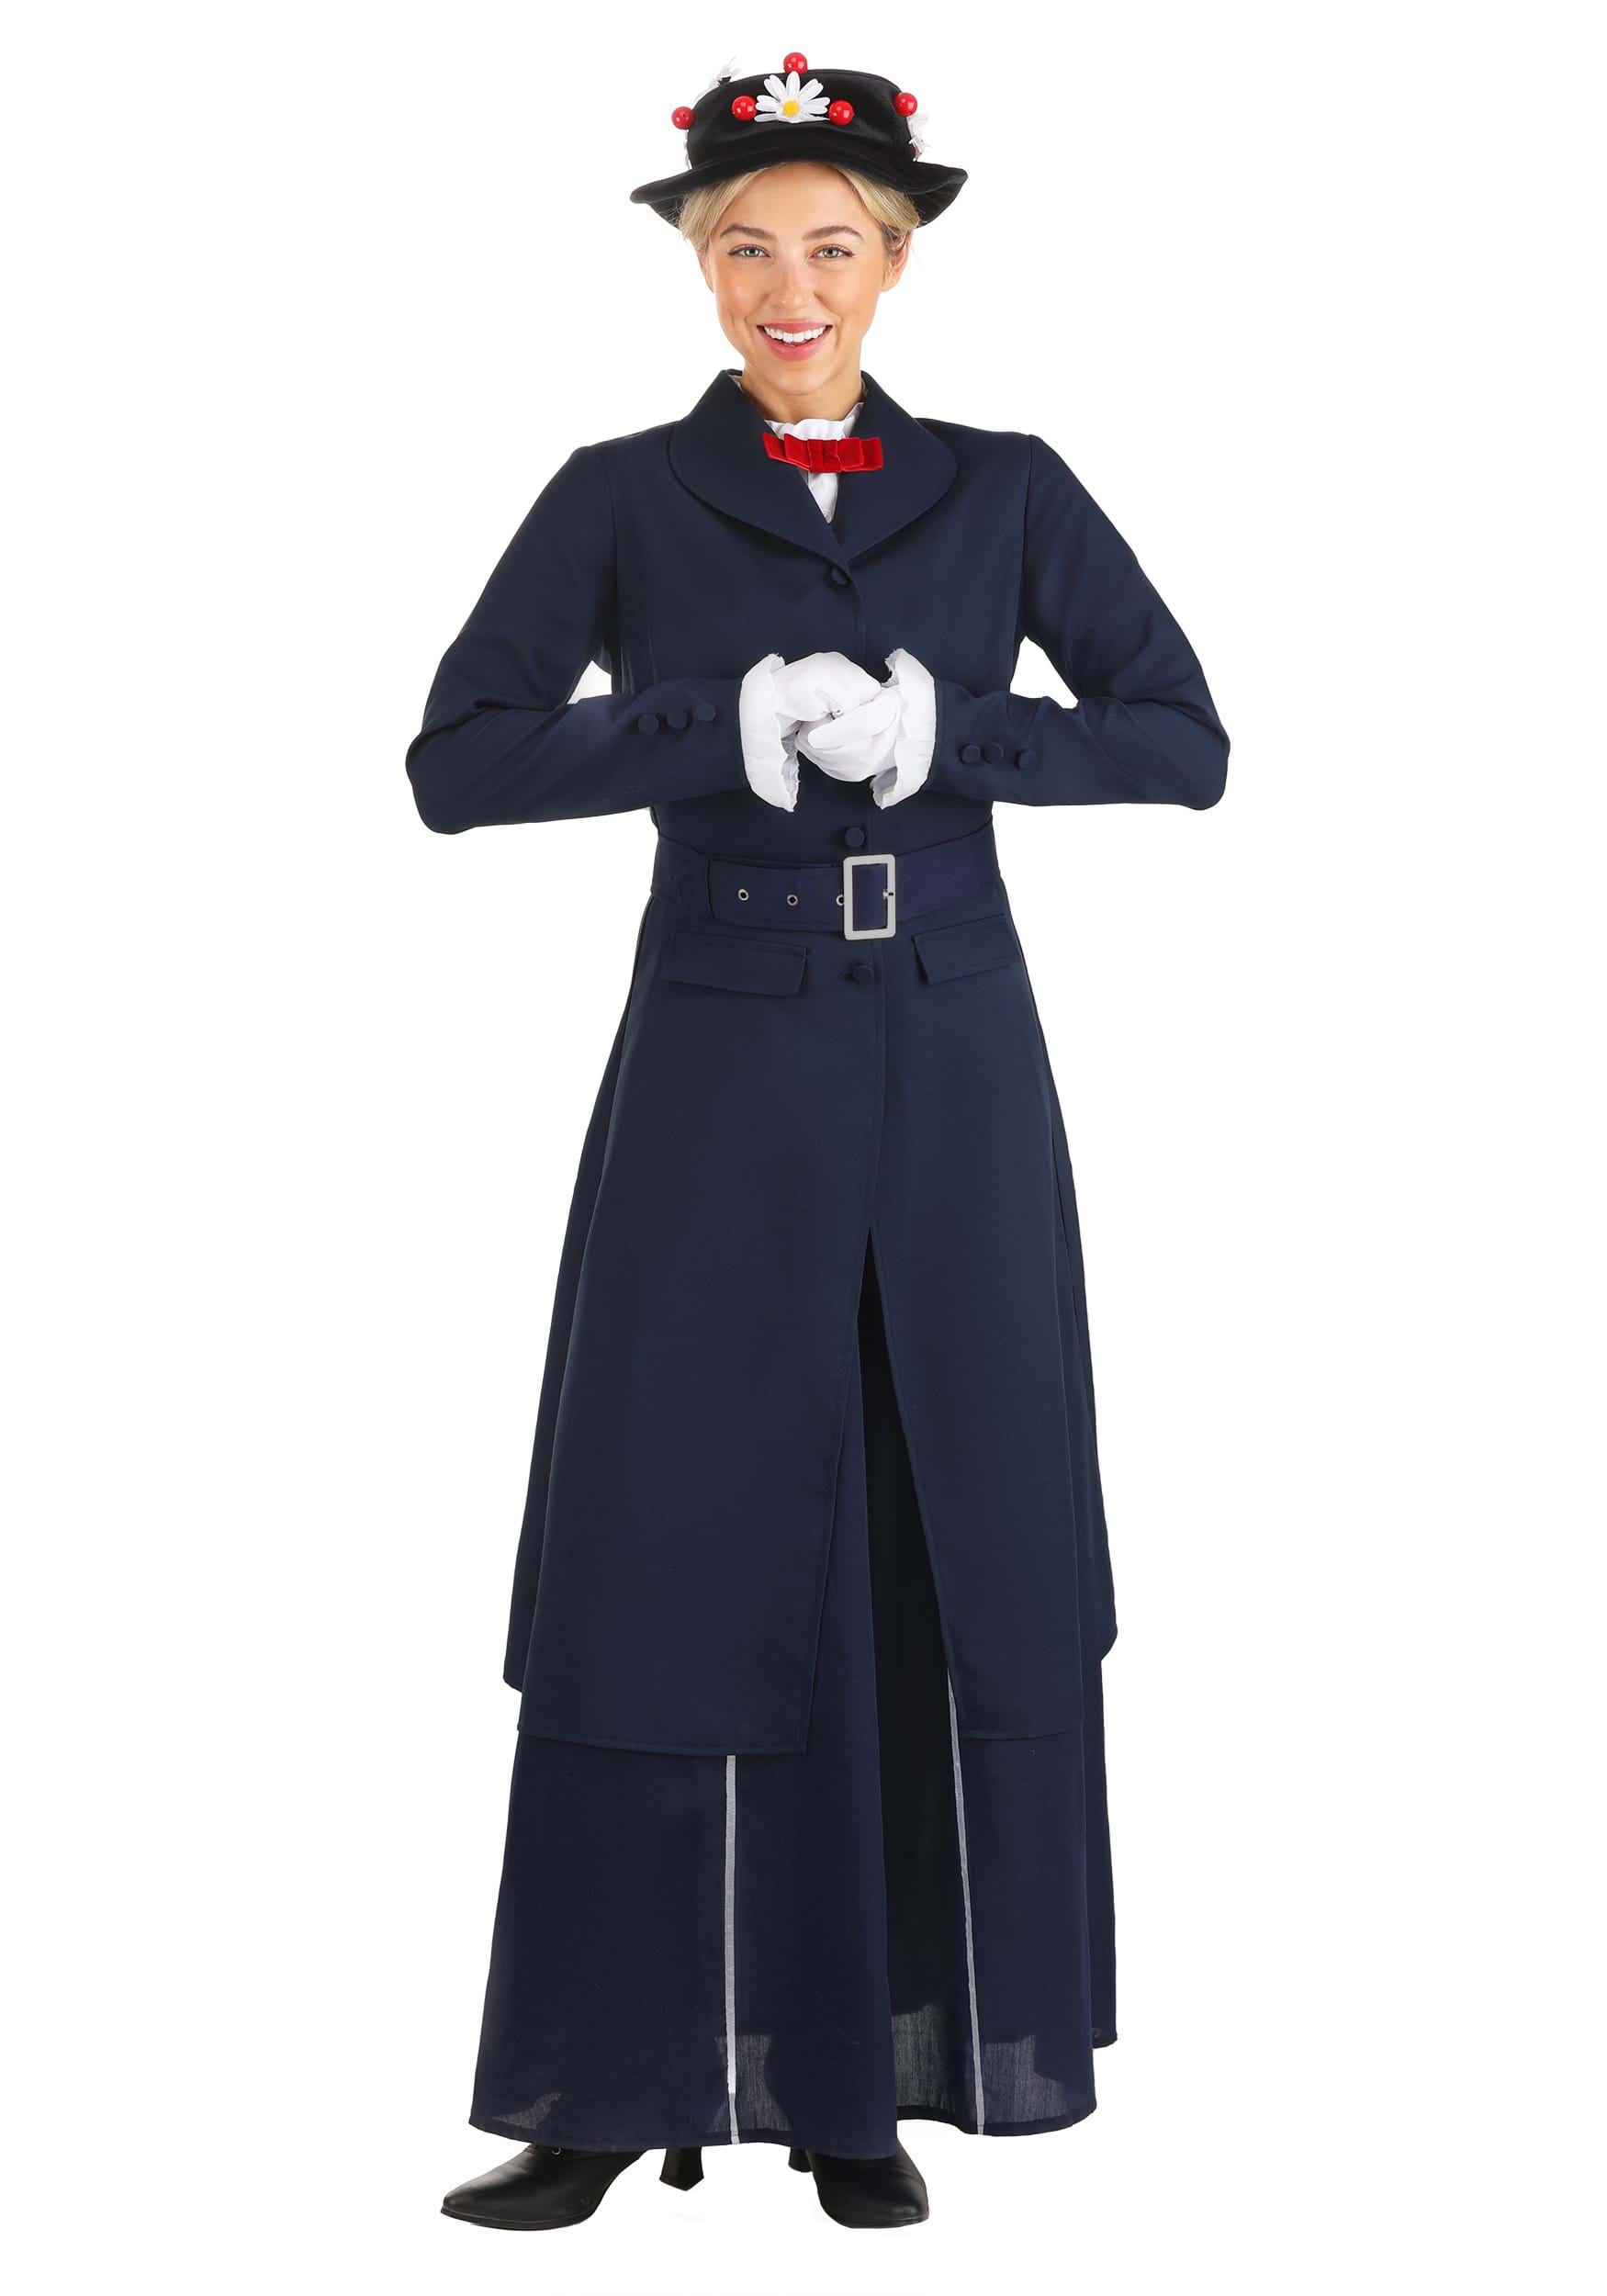 Photos - Fancy Dress Mary Poppins FUN Costumes  Women's Costume Blue/Red/White 